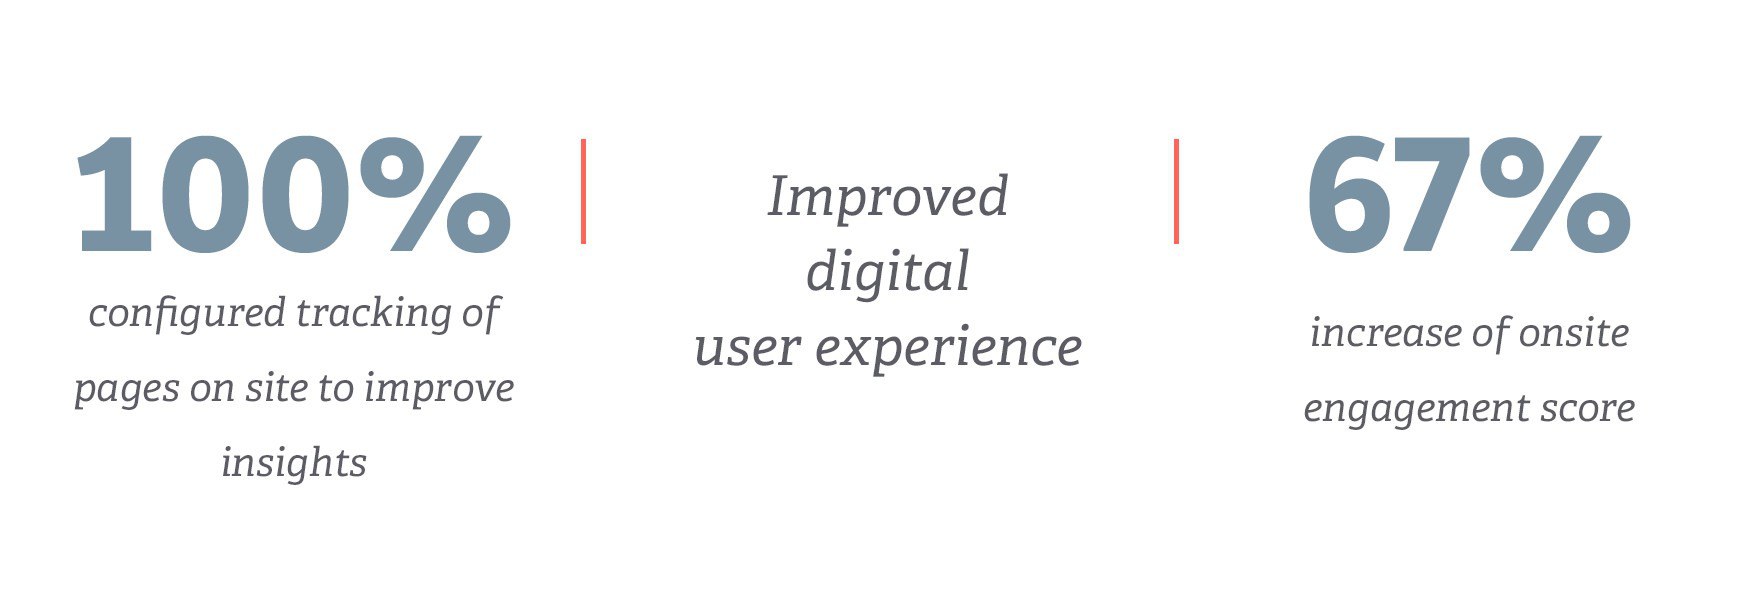 Improved digital experience: 100% tracking and 67% increase engagement score of onsite pages.